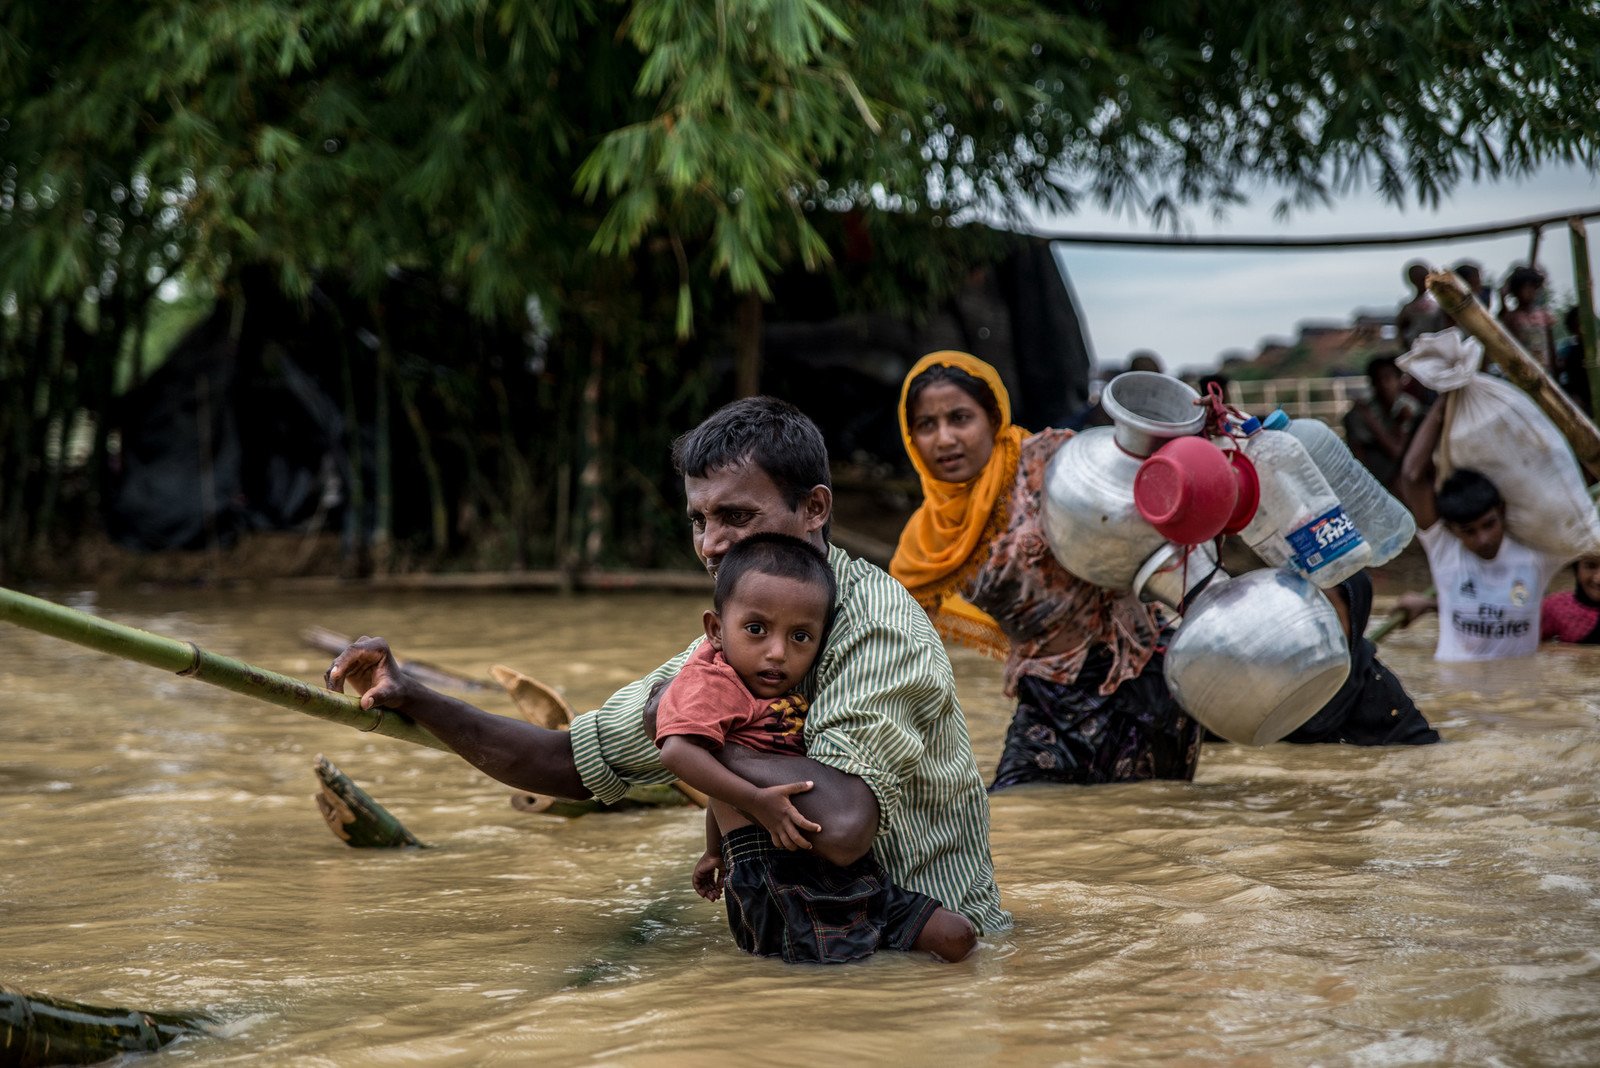 A father carries his son across a broken bamboo bridge on the edge of Balukhali camp, Bangladesh. Three days of heavy rains flooded many of the areas where people had set up temporary shelters, forcing them to move to higher ground. photo: Aurélie Marrier d'Unienville